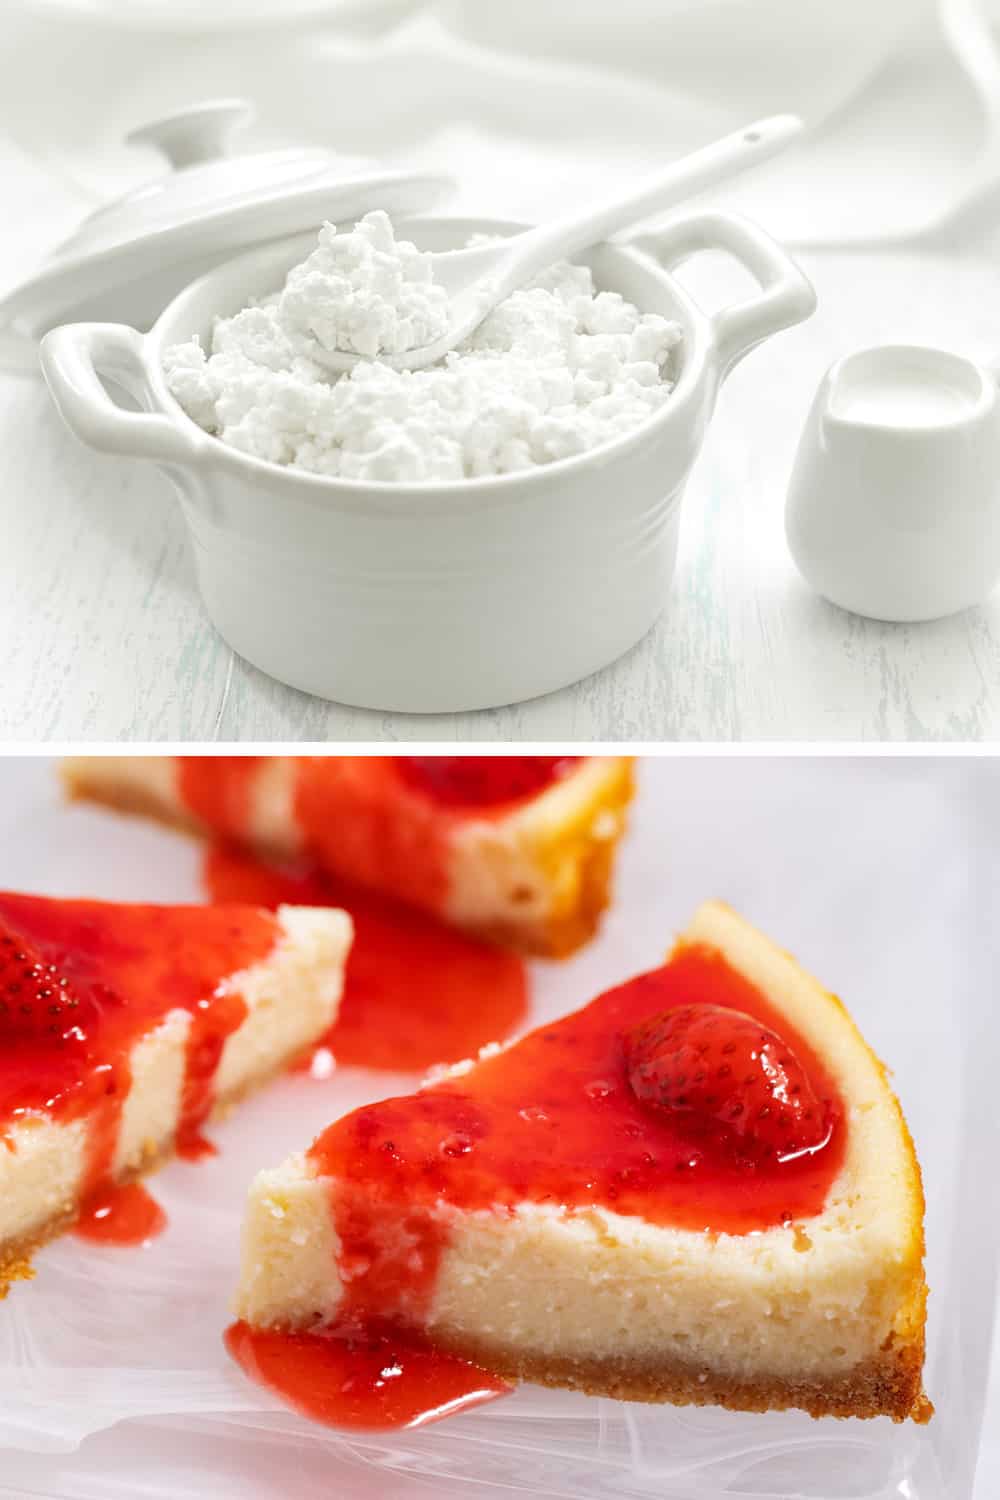 Bowl of cottage cheese and cheesecake made with cottage cheese.